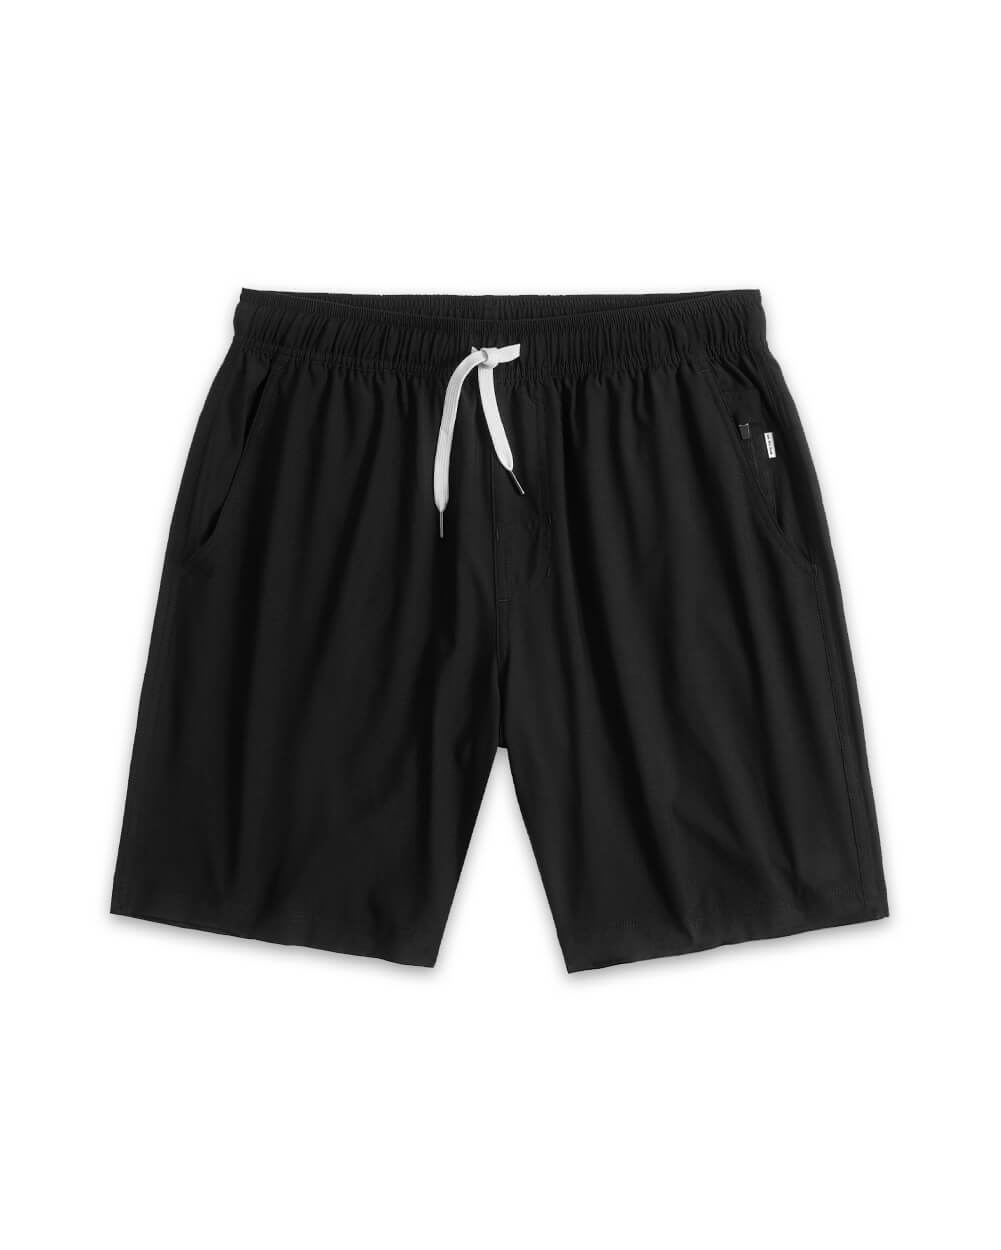 Active Shorts - Non-Branded Black / S